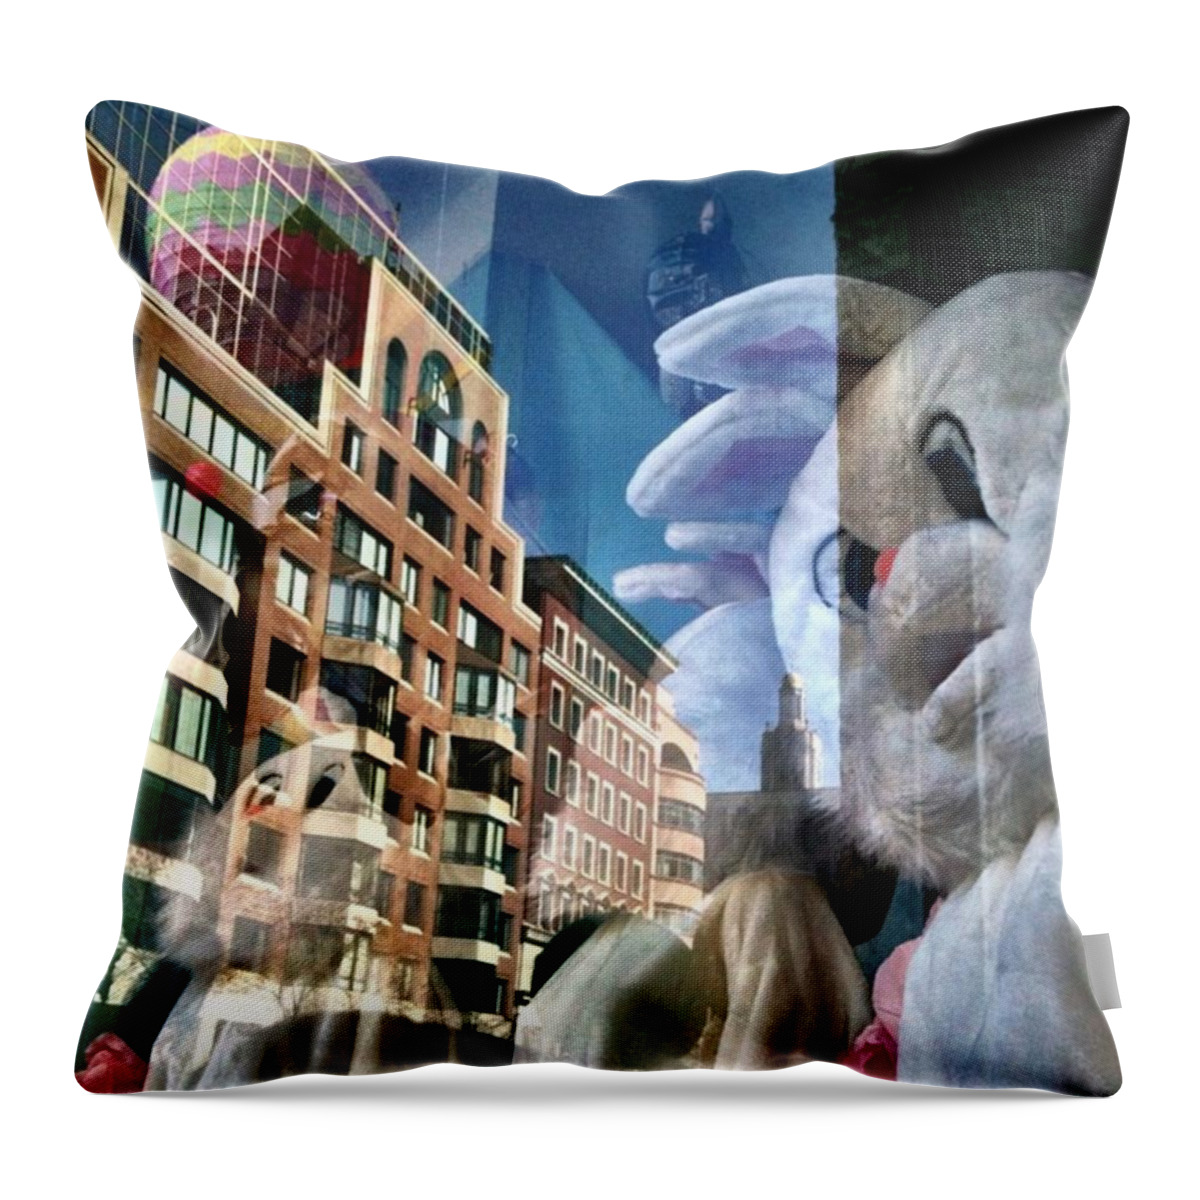 Creepy Throw Pillow featuring the photograph Bunny Costumes by Heather Classen